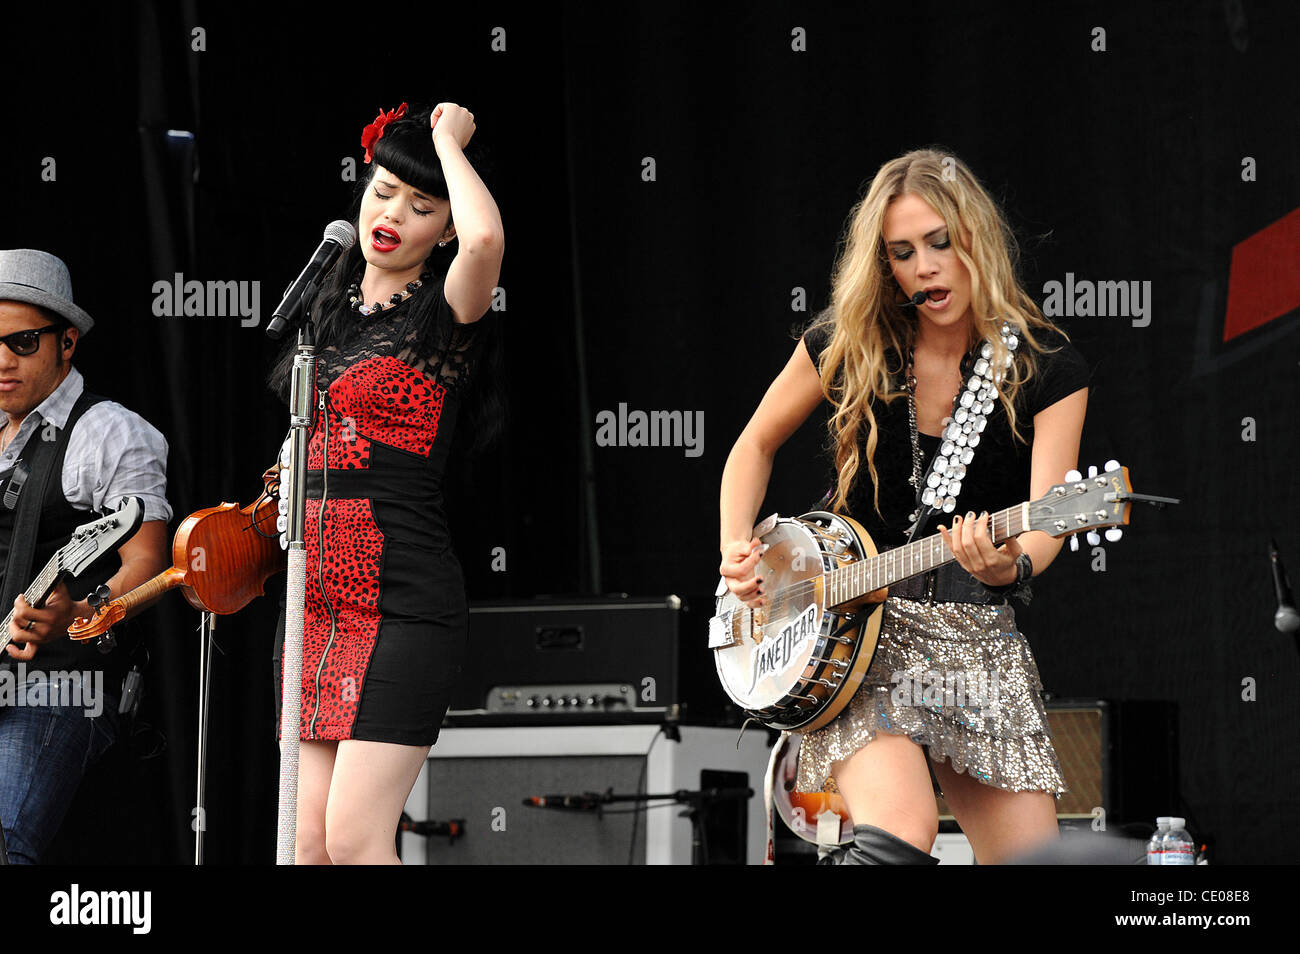 Sept 25, 2011 - Raleigh, North Carolina; USA - (L-R) Musician SUSIE BROWN and DANELLE LEVERETT of the band The JaneDear Girls performs live as part of the 2011 Brad Paisley H20 II Wetter & Wilder World Tour as it closes out on the last night at the Time Warner Cable Music Pavilion located in Raleigh Stock Photo